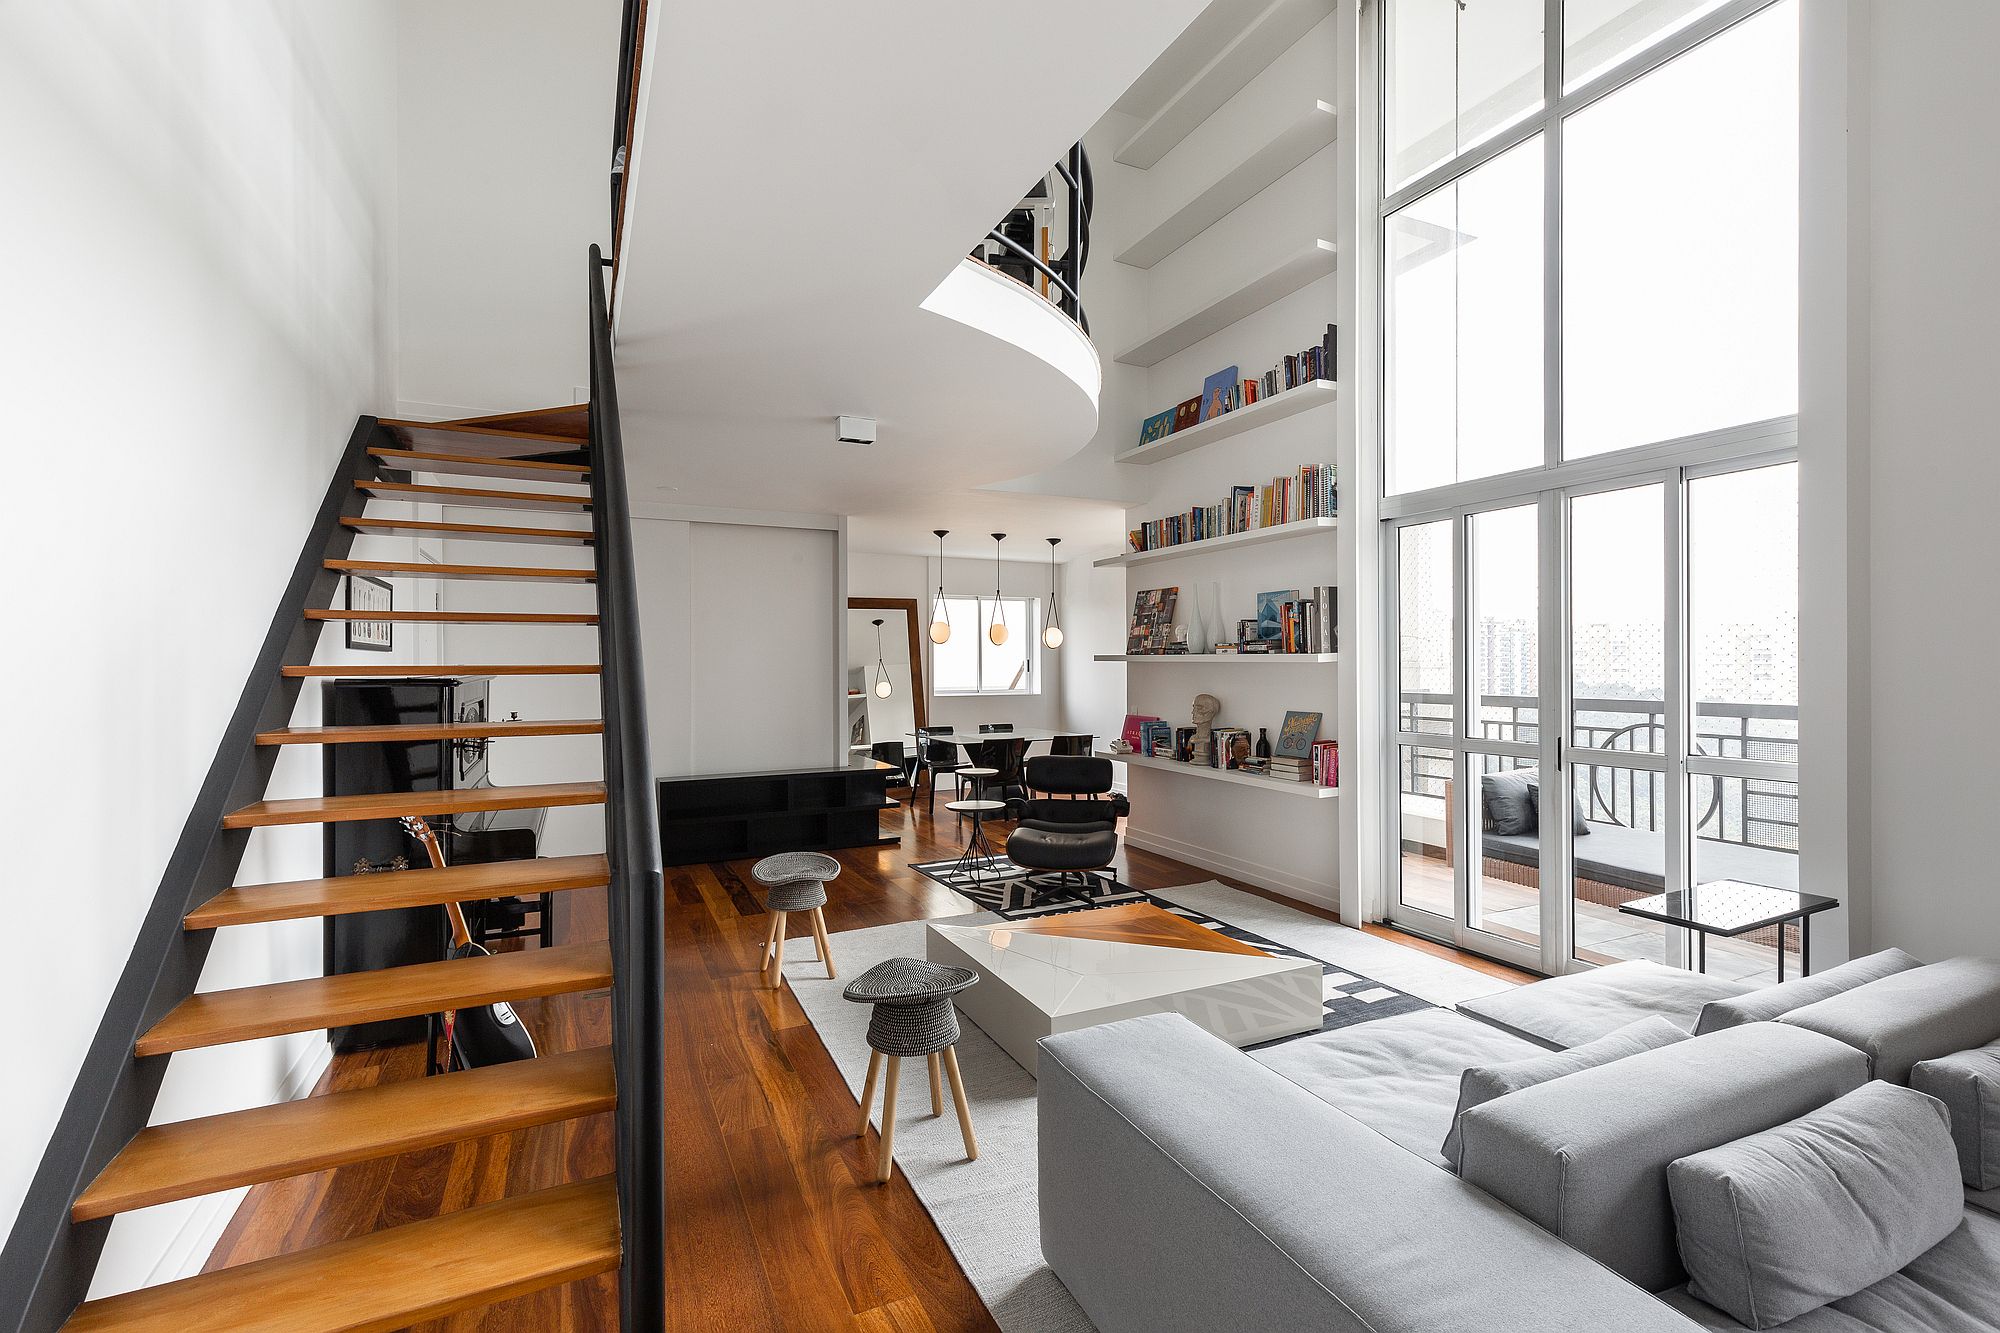 Stairway-leading-to-the-upper-mezzaine-level-of-the-loft